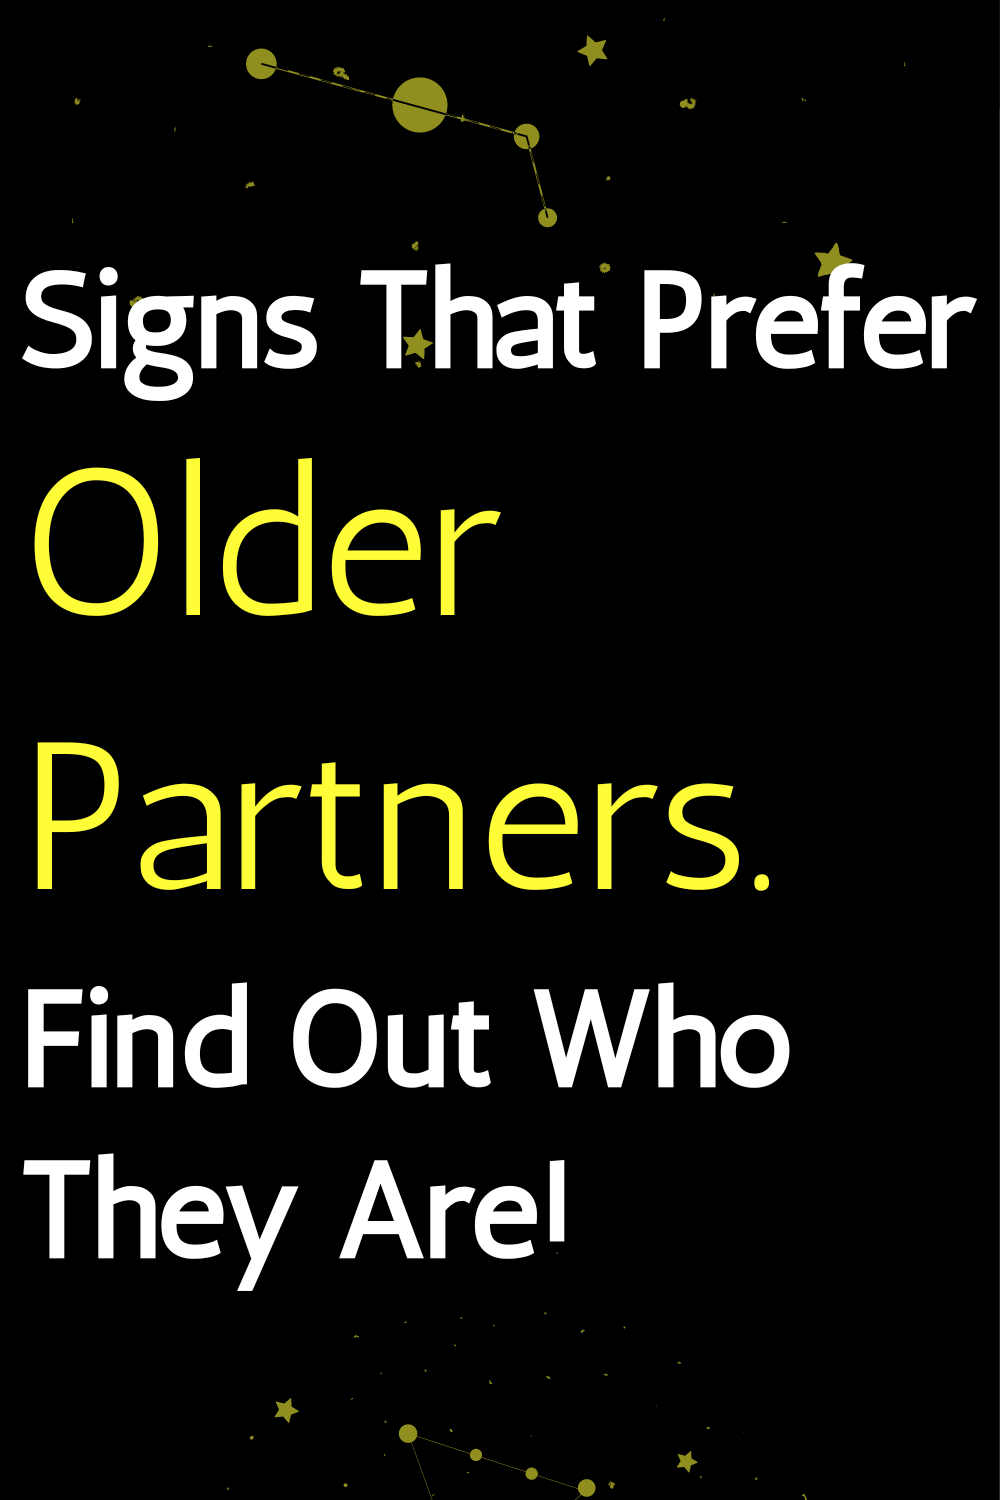 Signs That Prefer Older Partners. Find Out Who They Are!